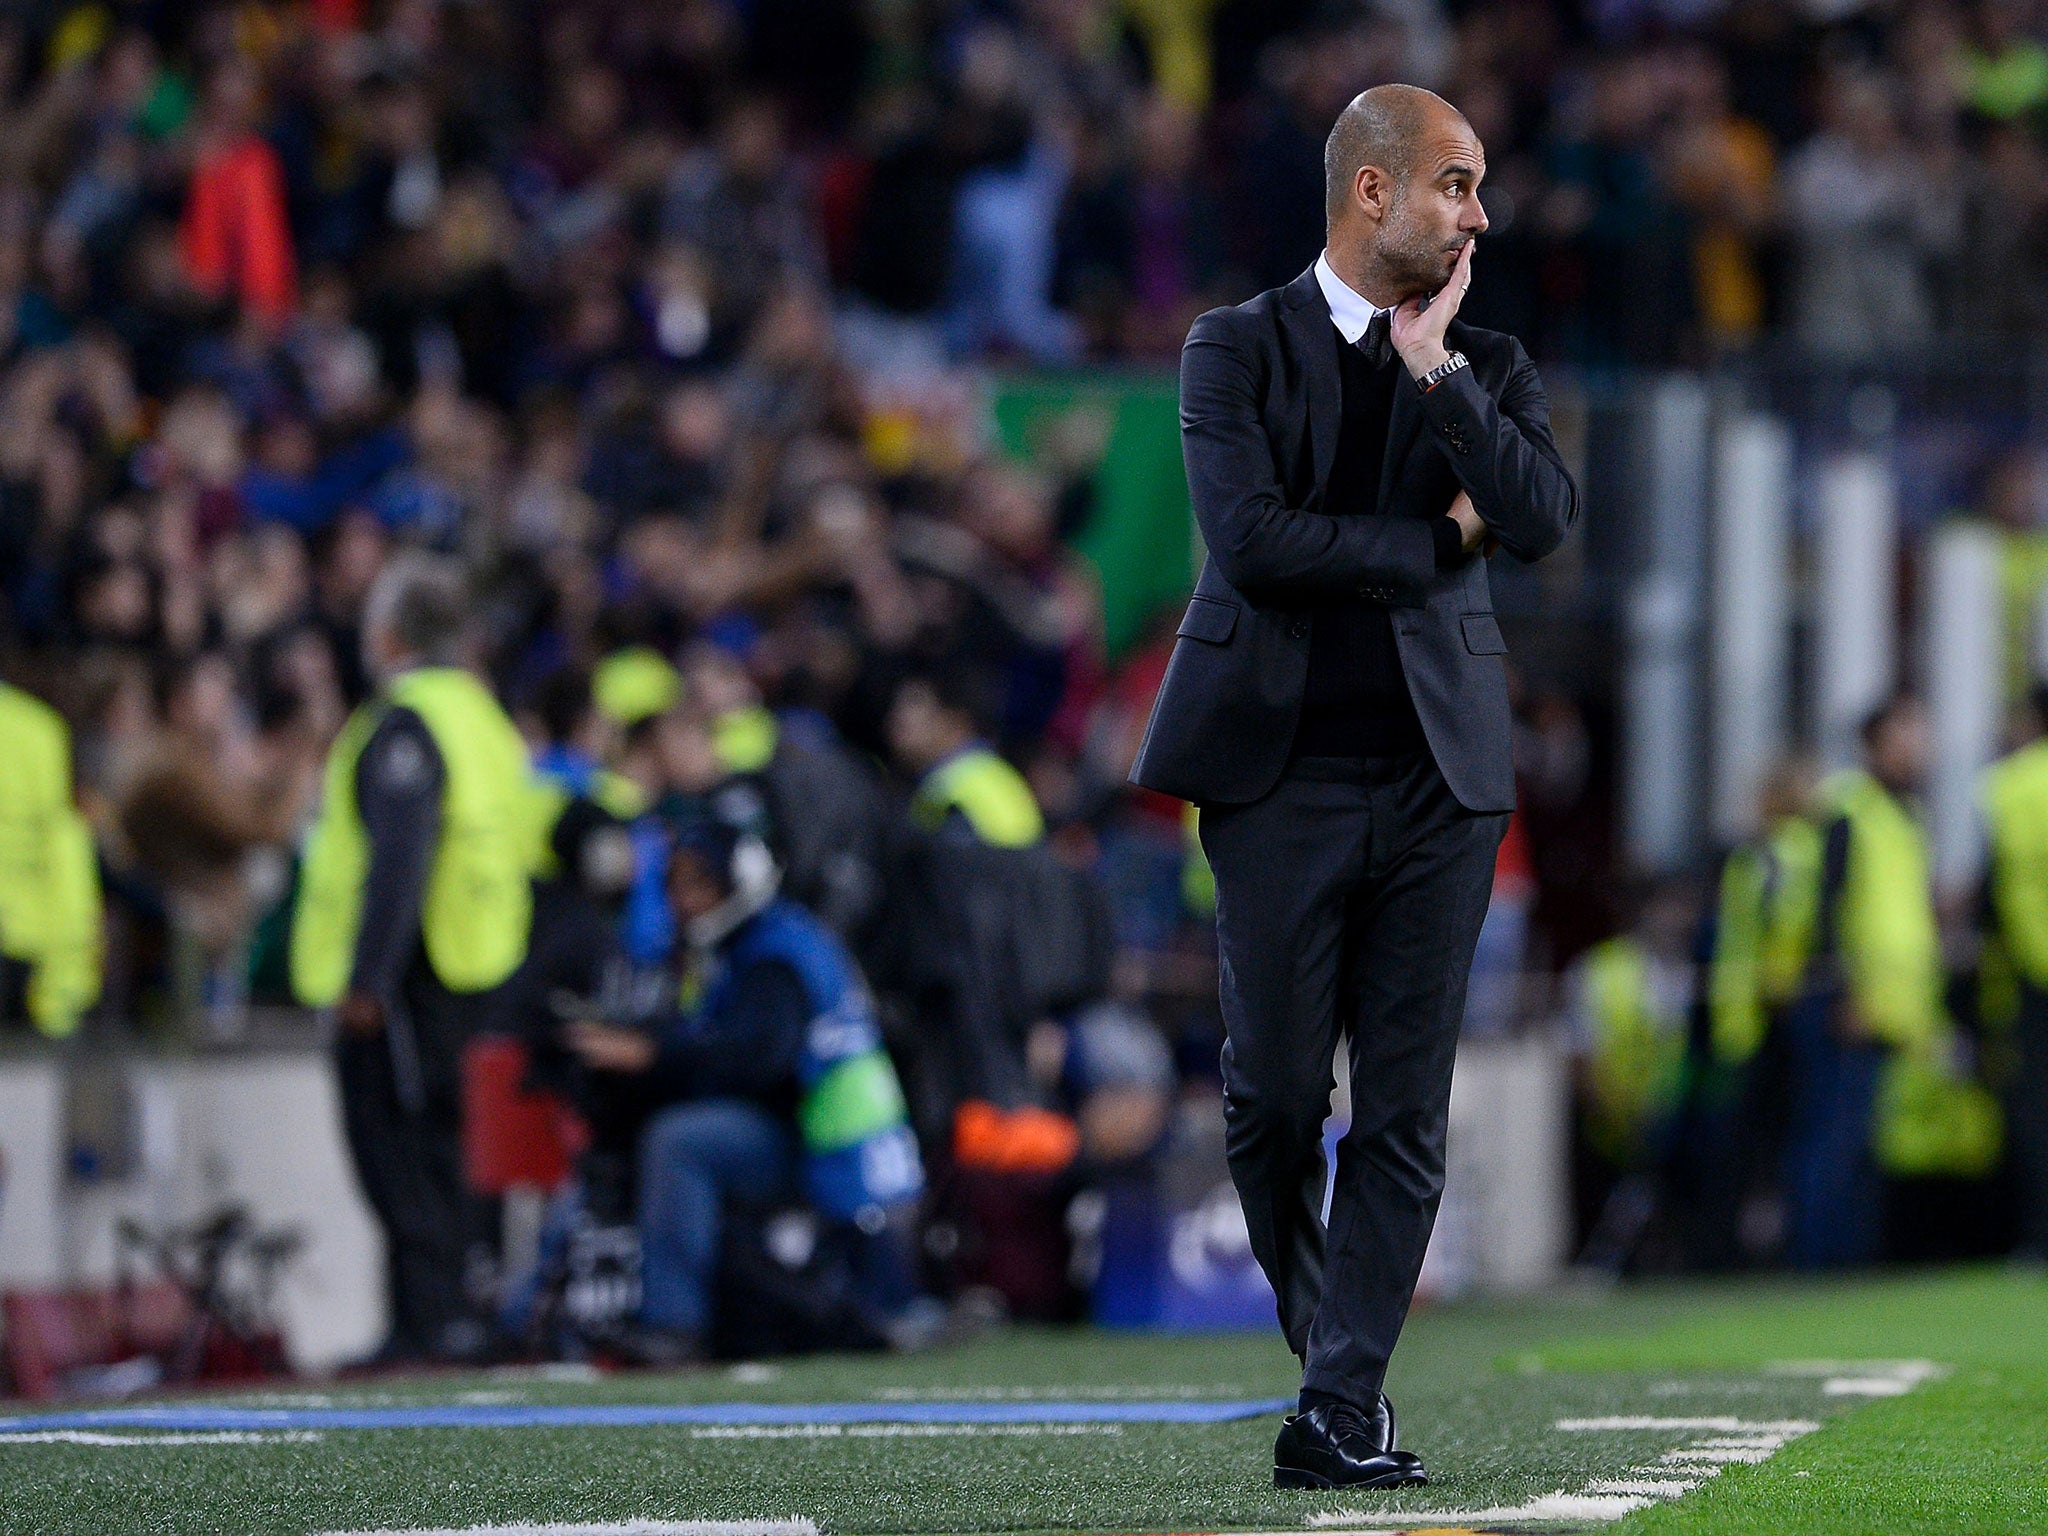 Guardiola could only watch on helplessly from the sidelines as his team struggled to impress at the Nou Camp